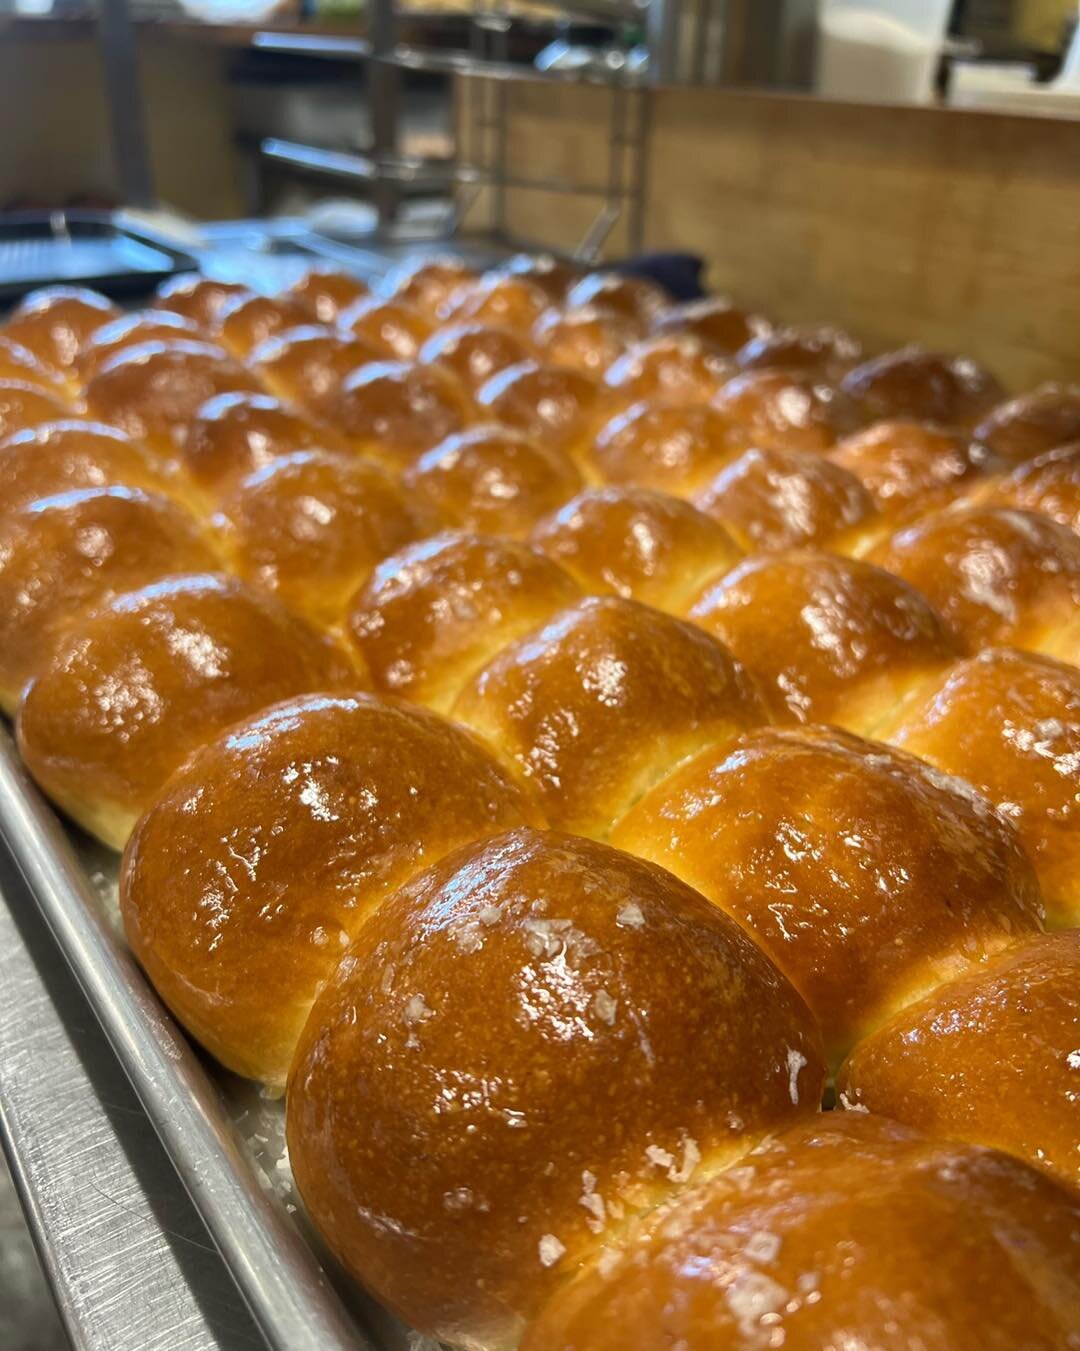 Brioche rolls will be available starting tomorrow afternoon through Saturday for your Easter meal!